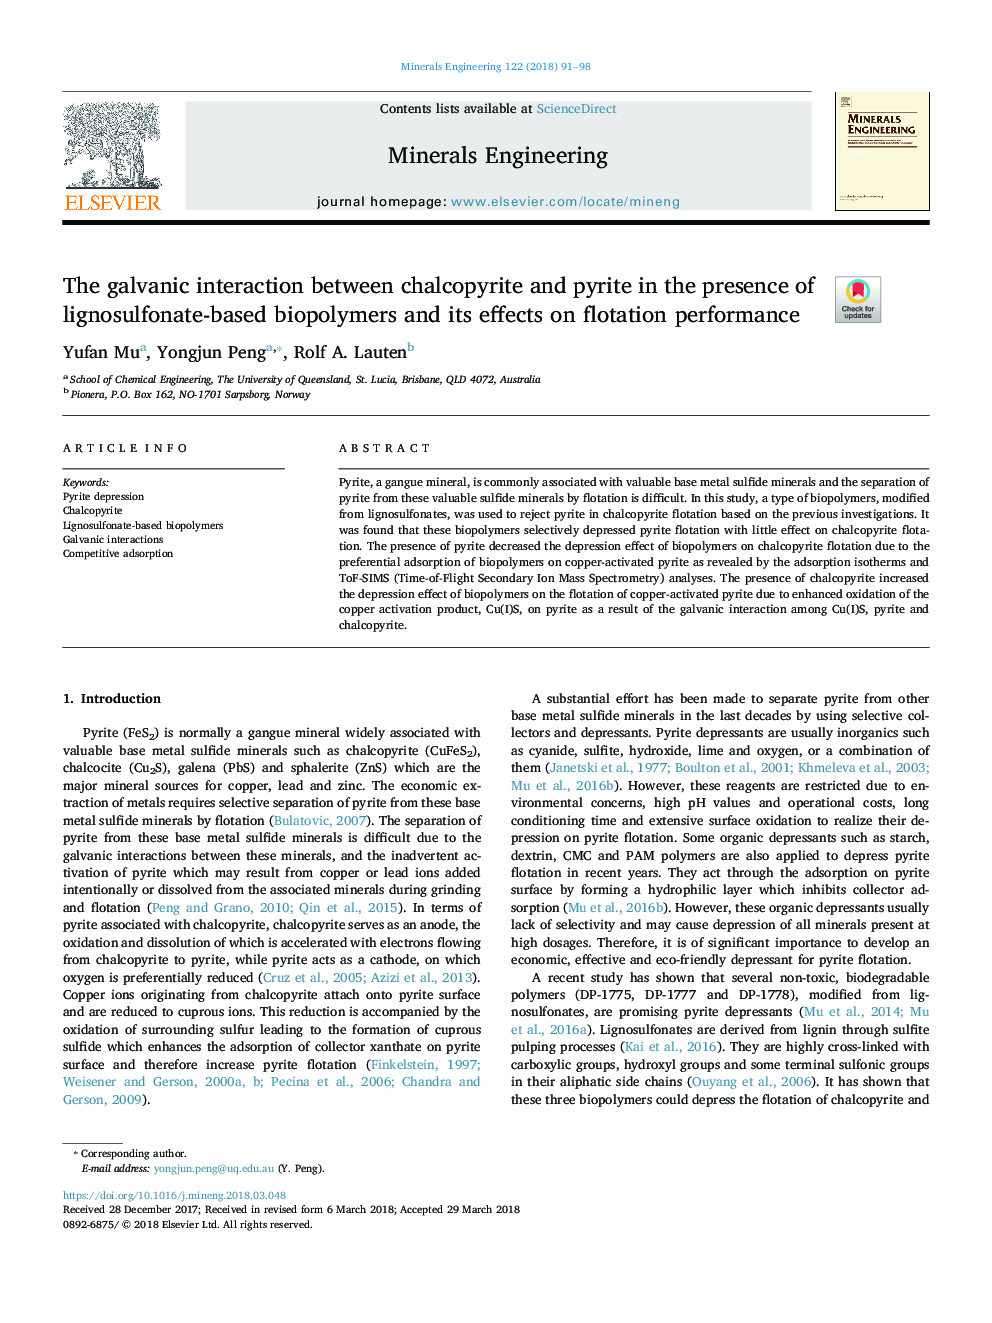 The galvanic interaction between chalcopyrite and pyrite in the presence of lignosulfonate-based biopolymers and its effects on flotation performance